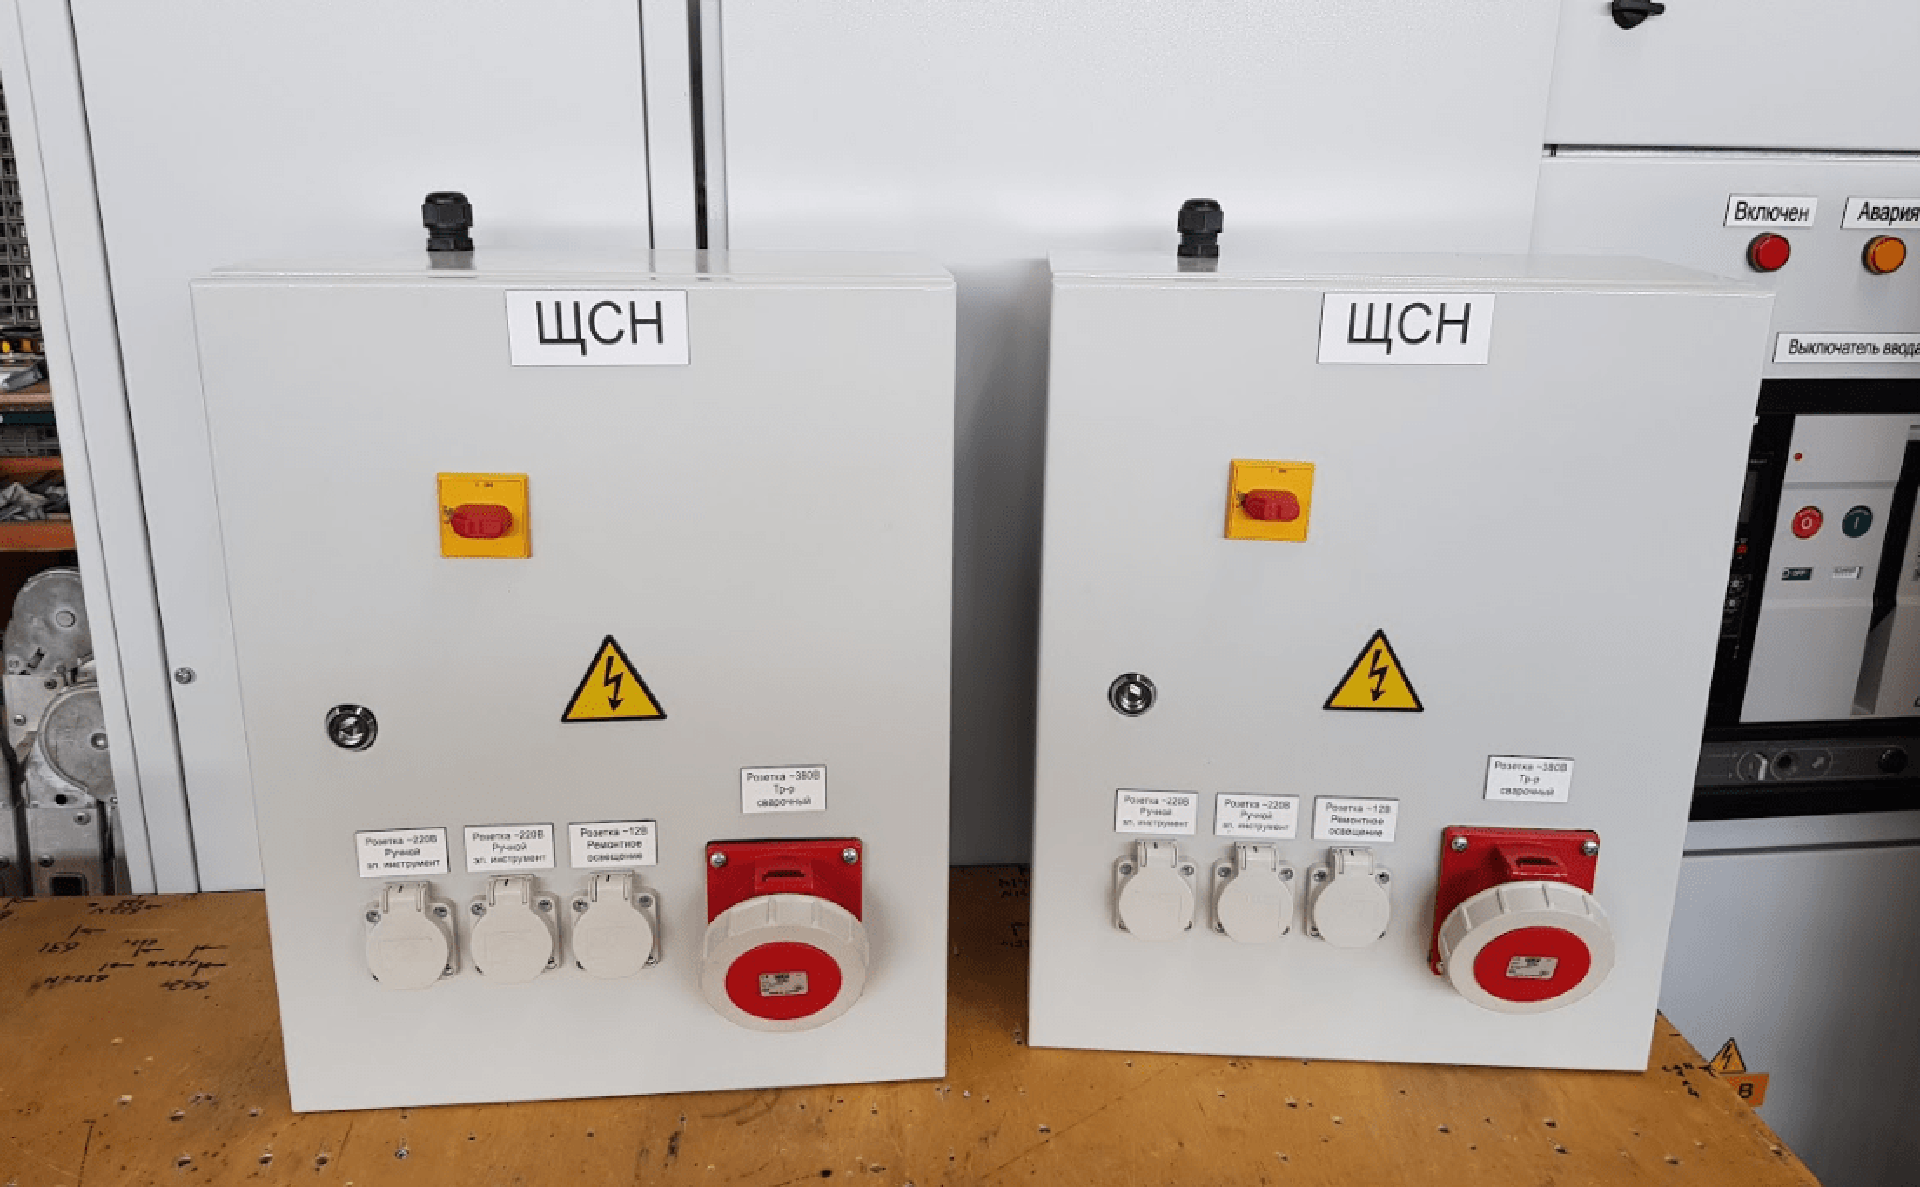 Other switchboard equipment